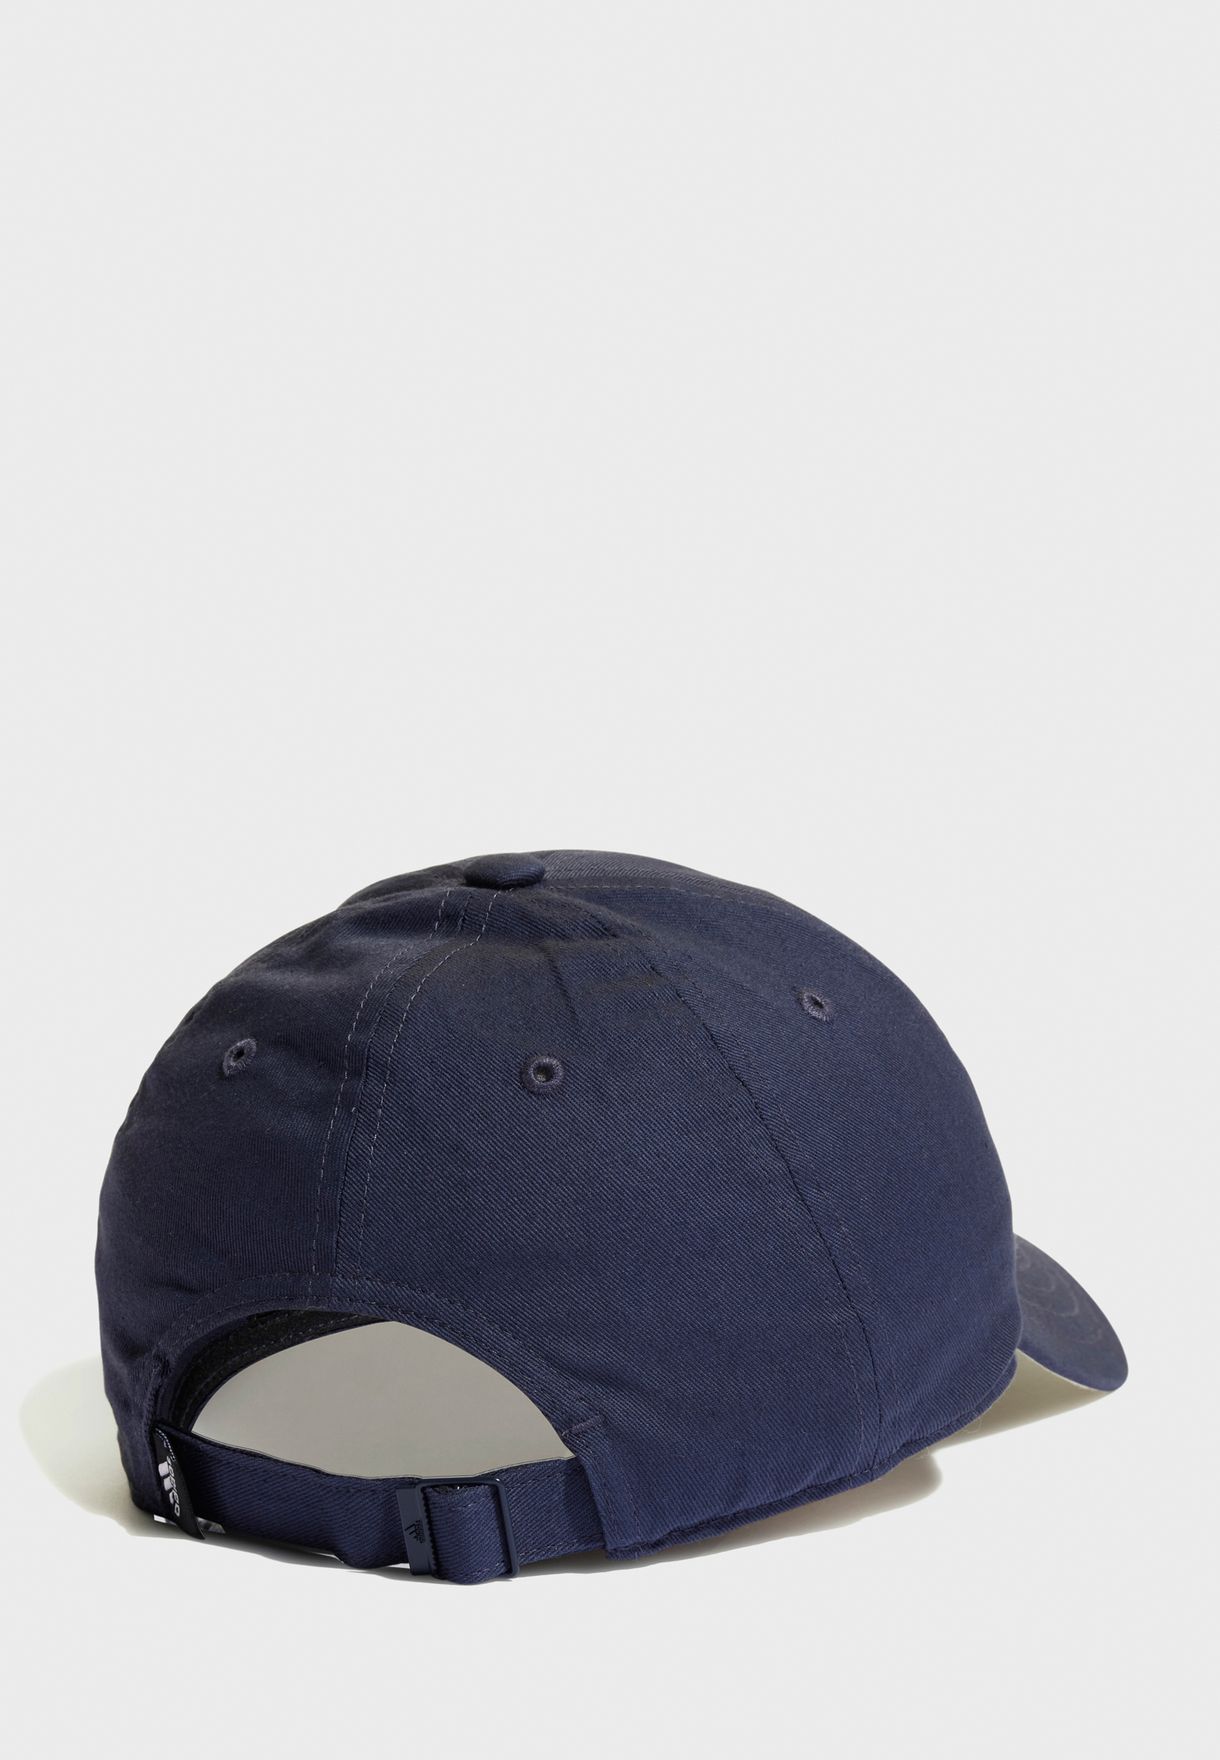 Youth Arkd3 Cap